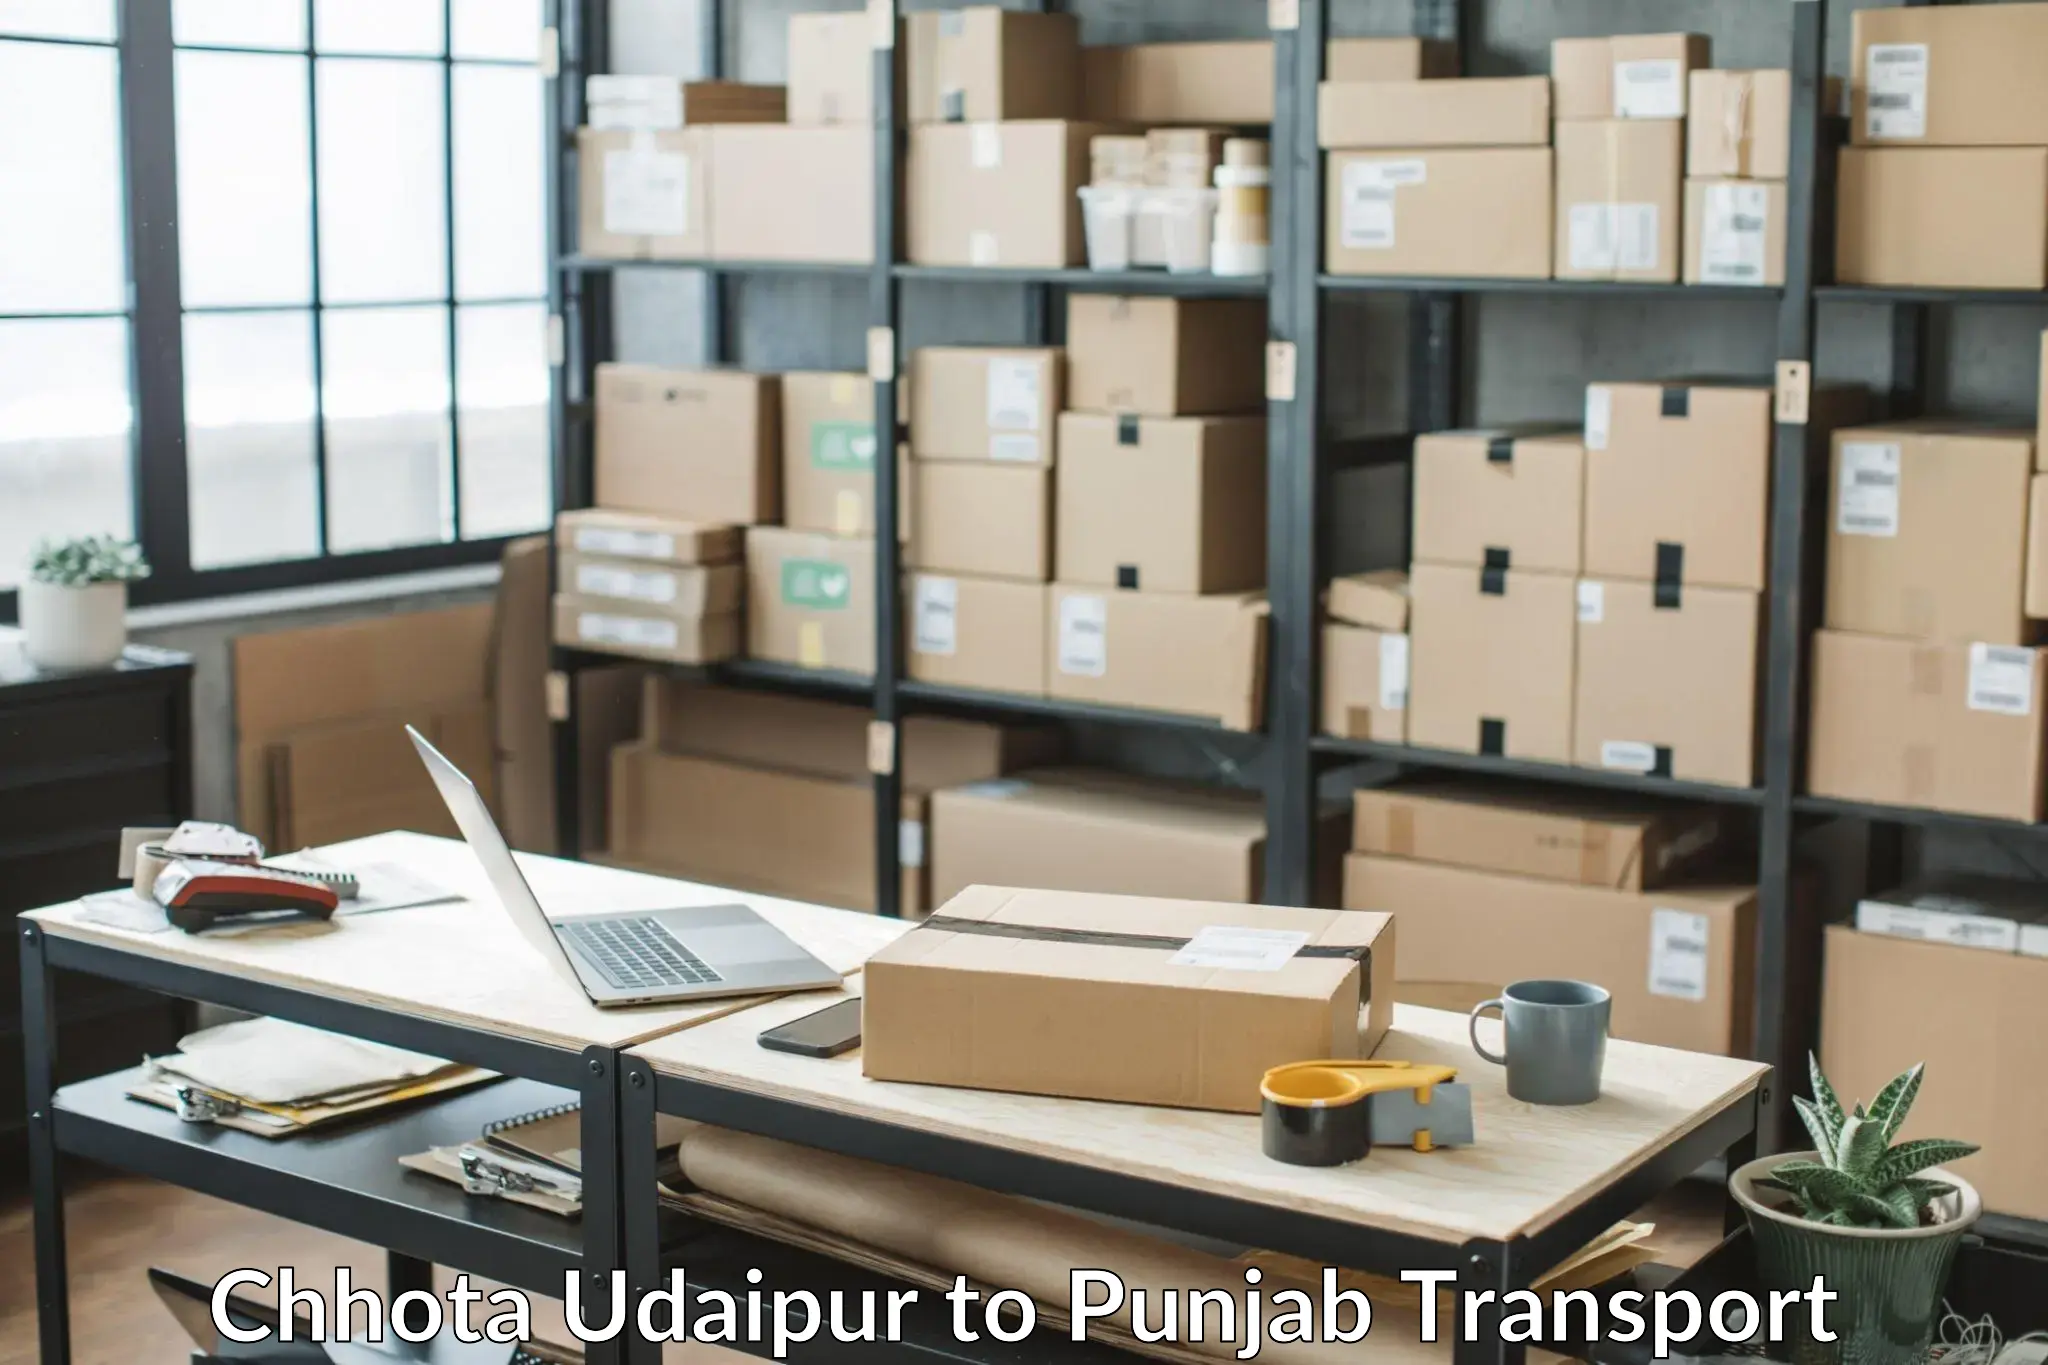 Transportation solution services Chhota Udaipur to Patiala